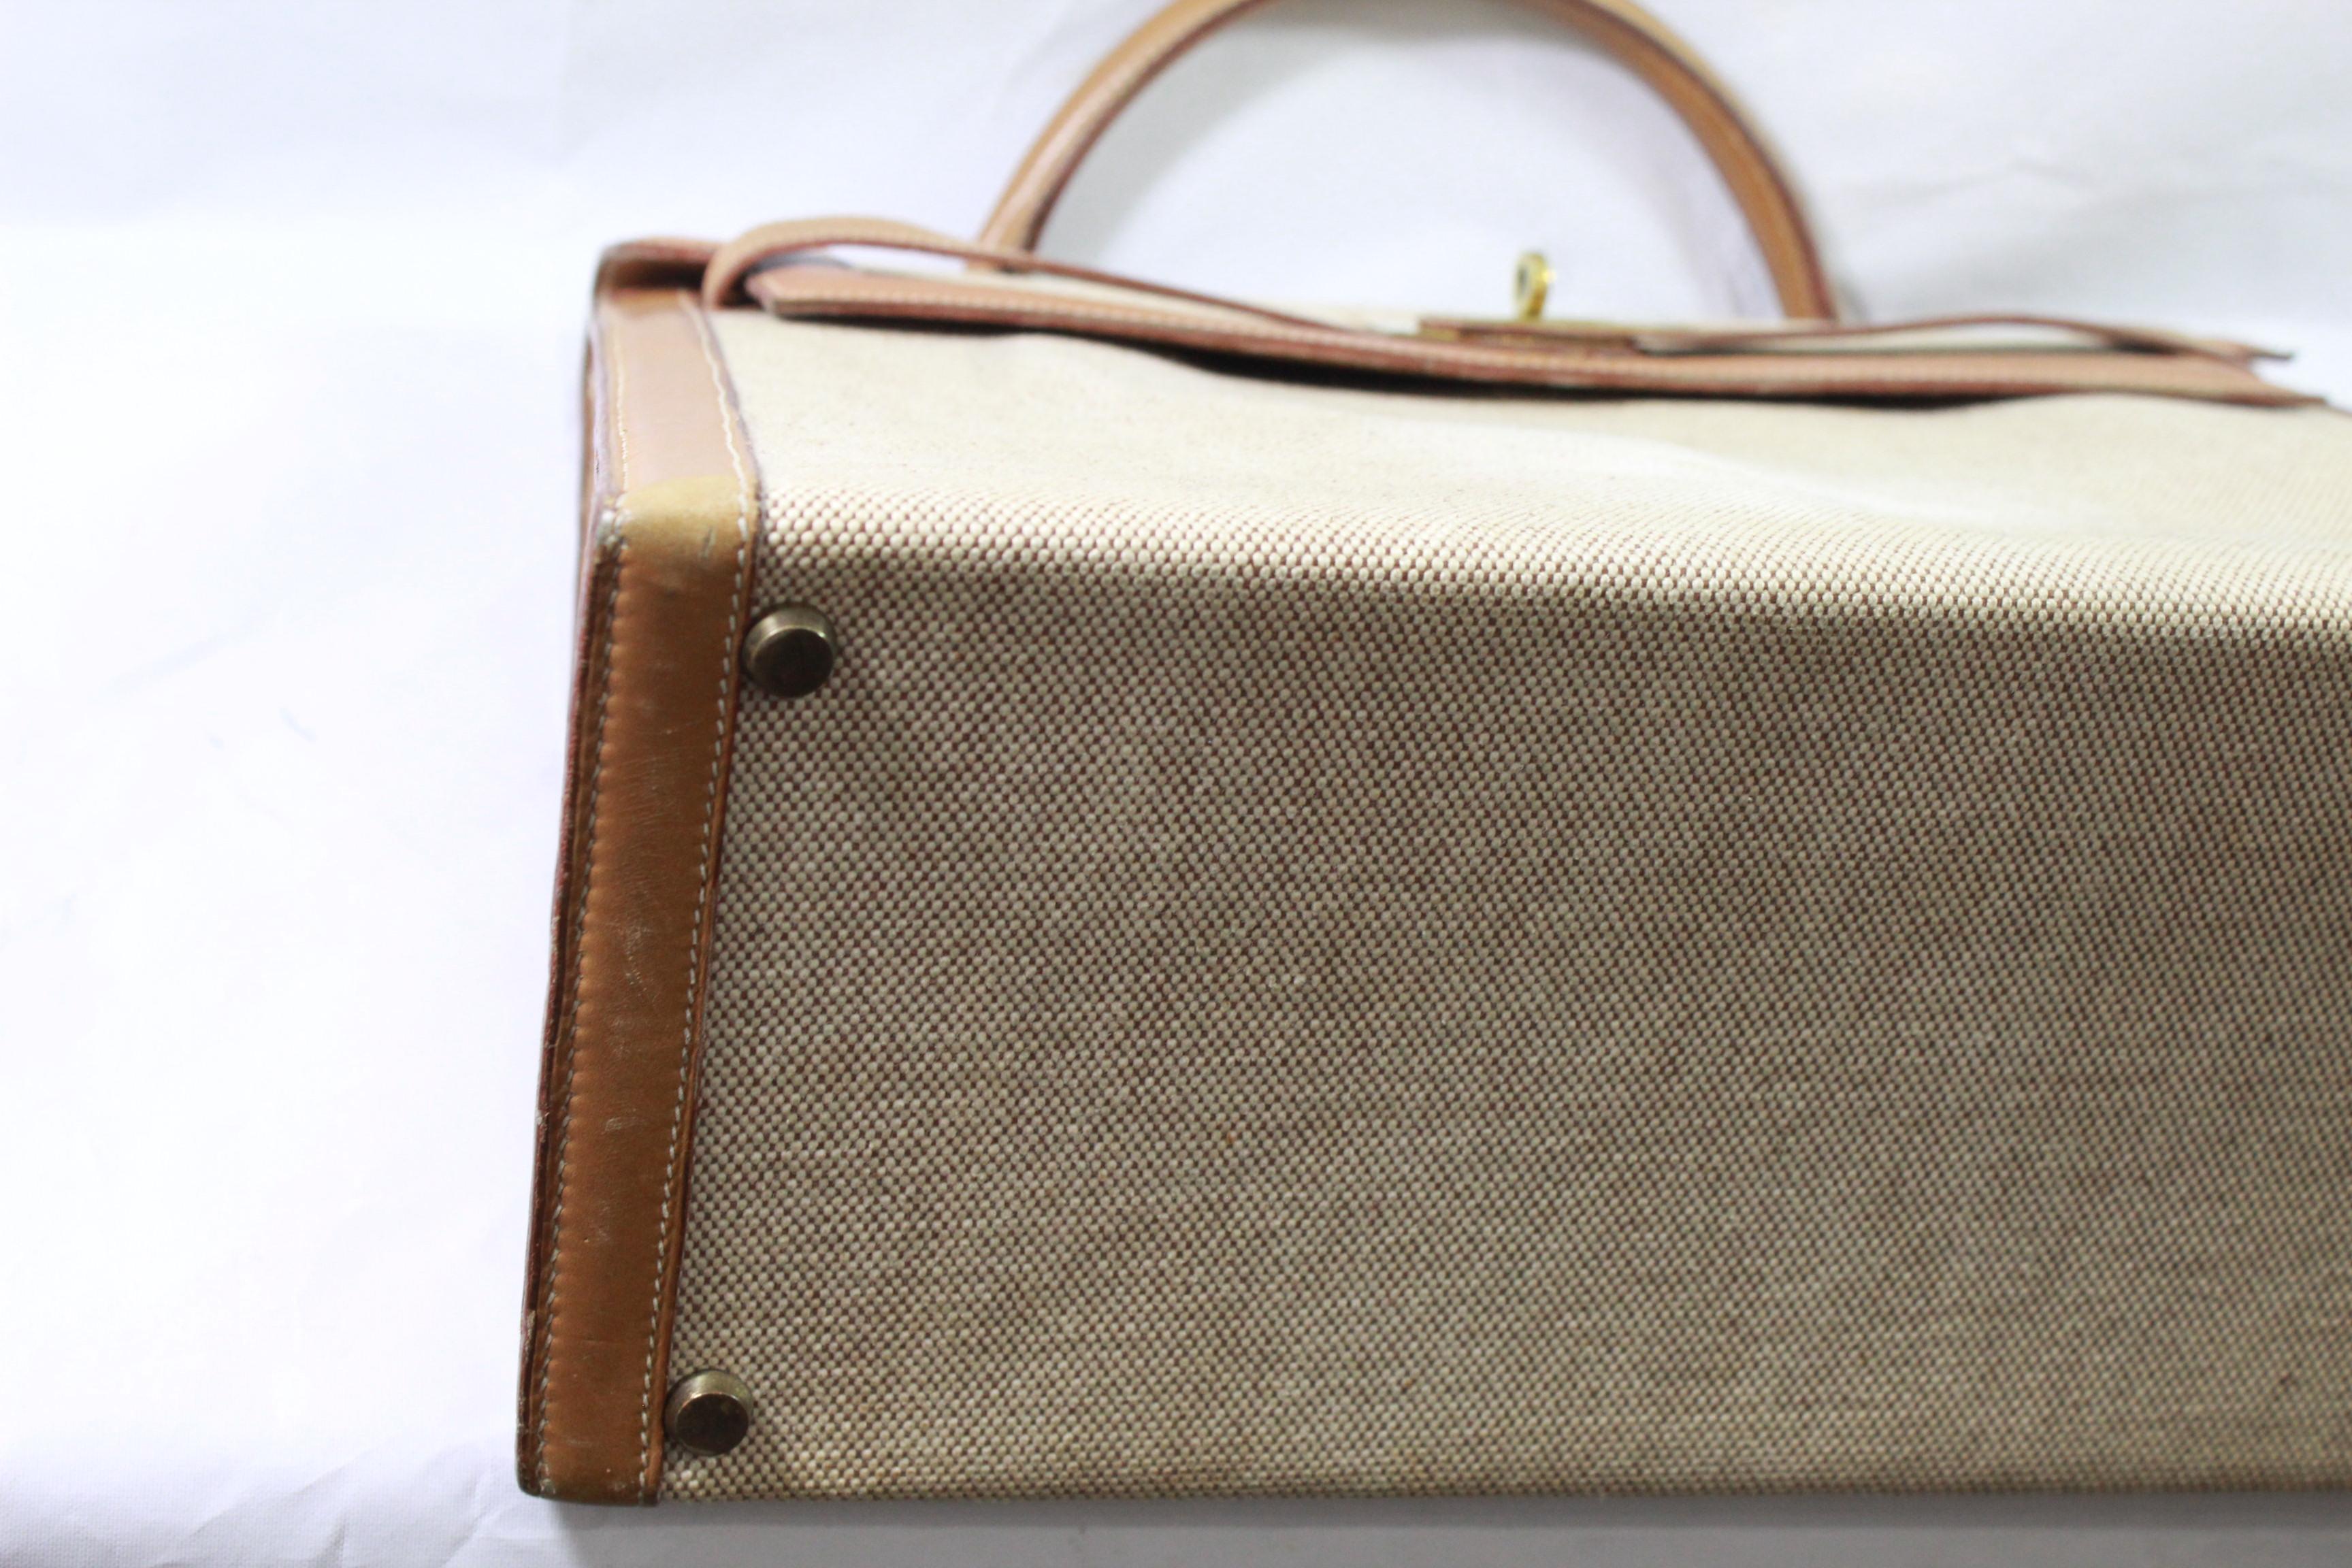 Viintage Hermes Kelly 35 in Brown Leather and Canvas. Fair condition 1